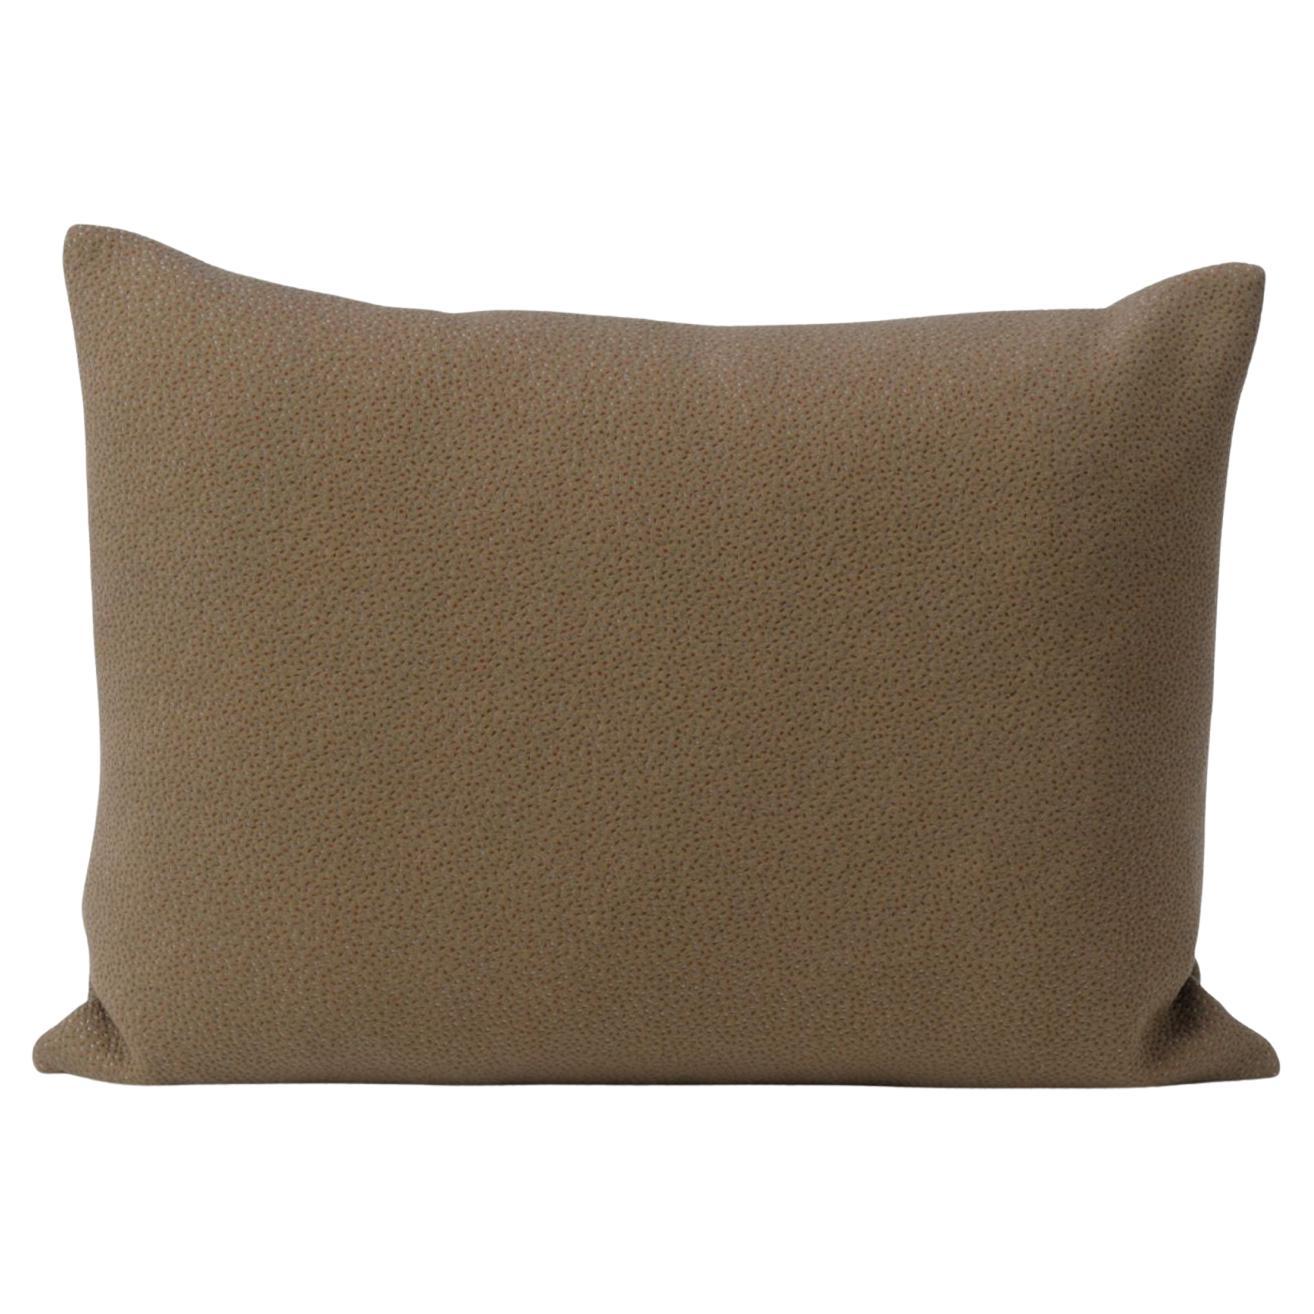 Galore Cushion Square Sprinkles Cappuccino Brown by Warm Nordic For Sale